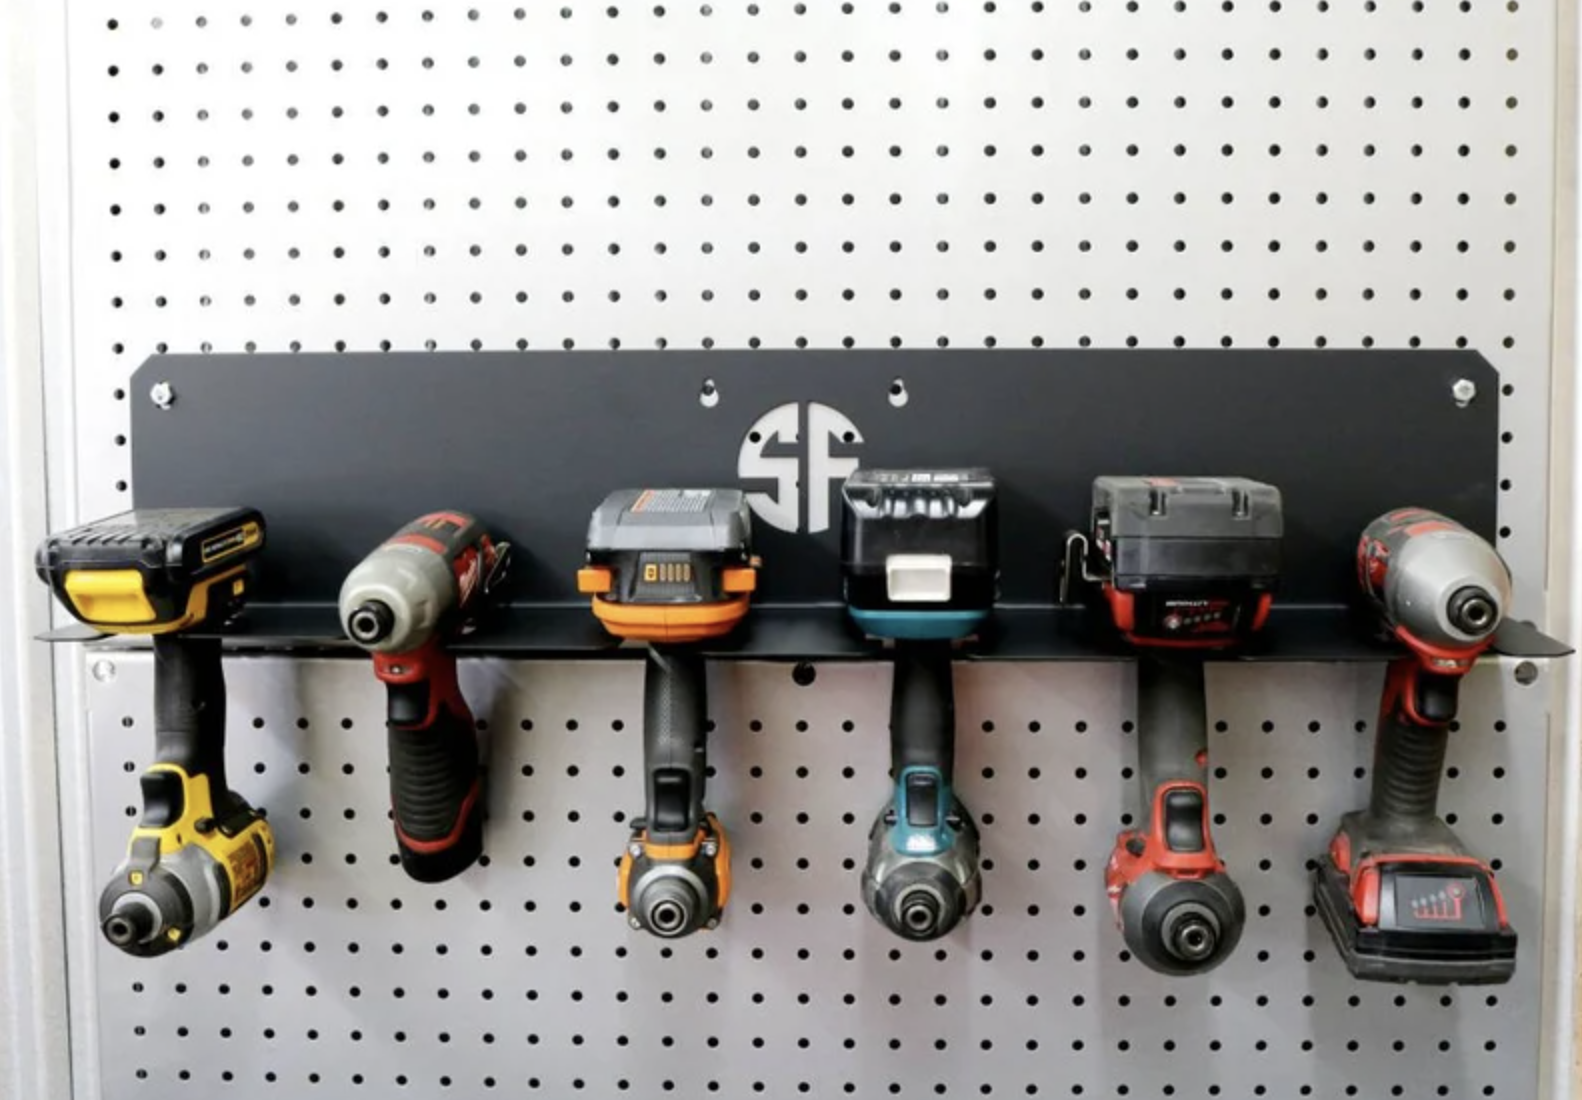 Six power tools are mounted to a wall